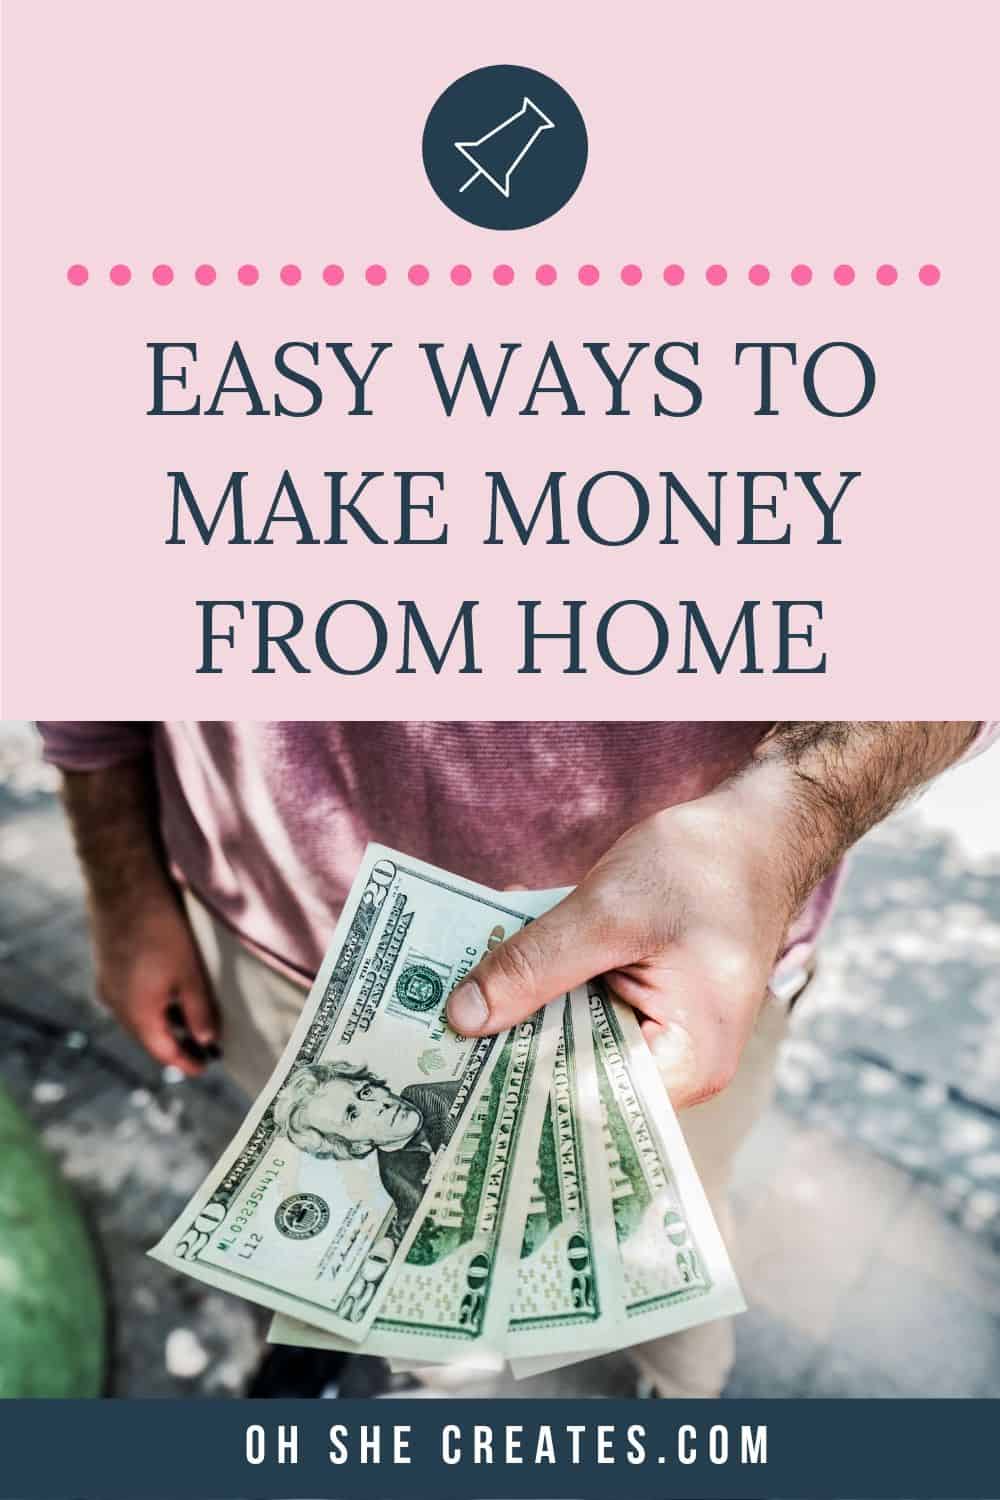 Easy ways to make money from home